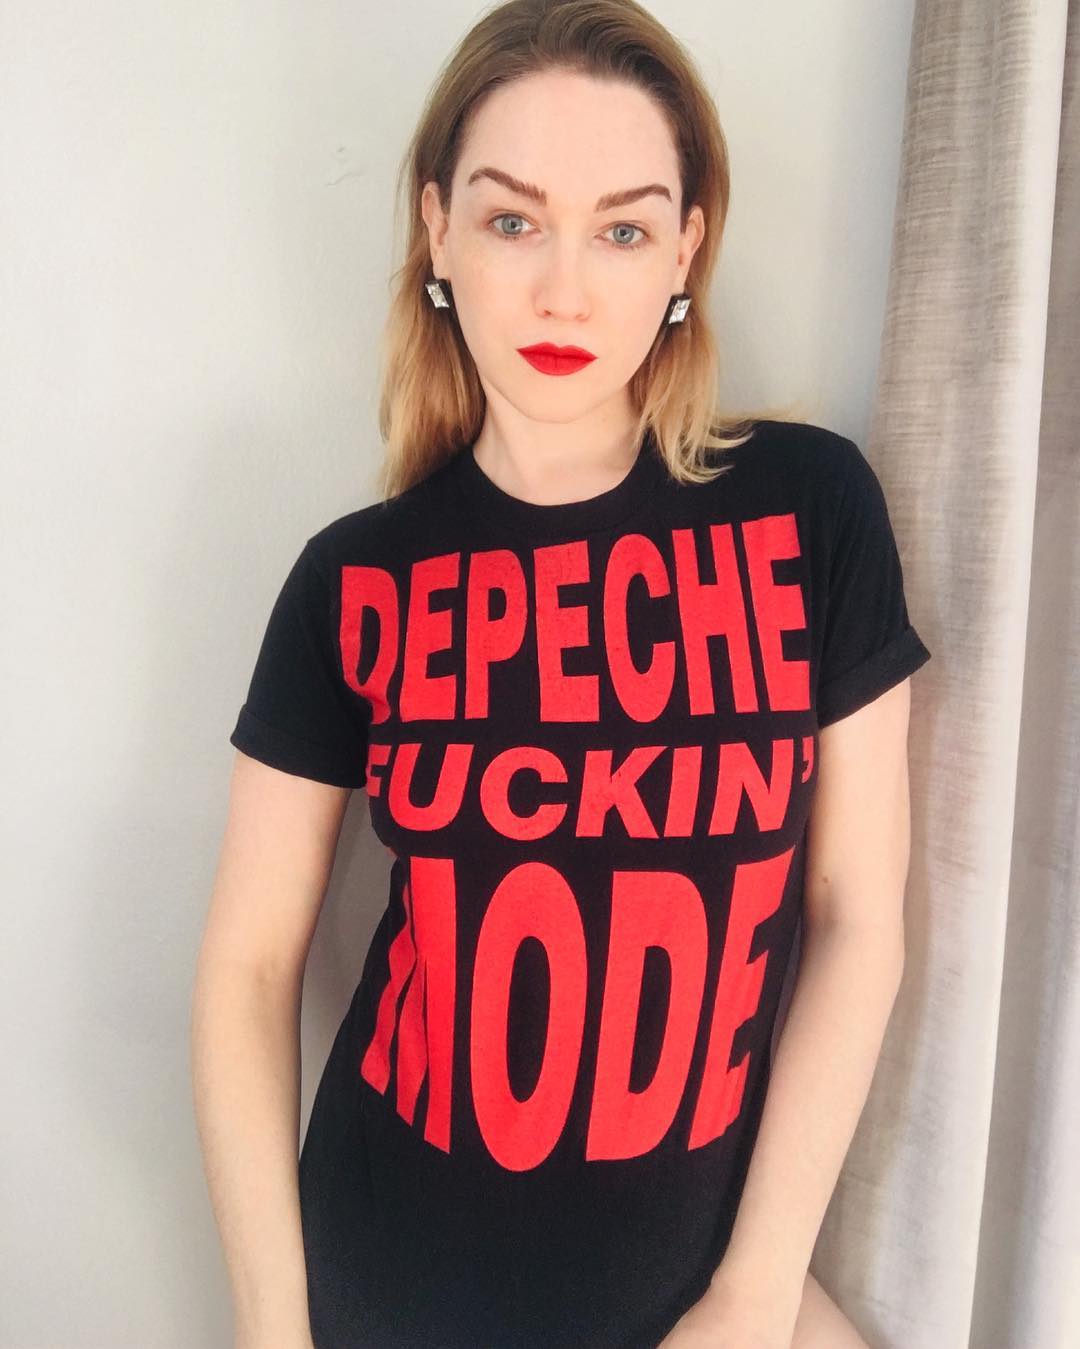 51 Hot Pictures Of Jamie Clayton That Will Make Your Heart Pound For Her | Best Of Comic Books